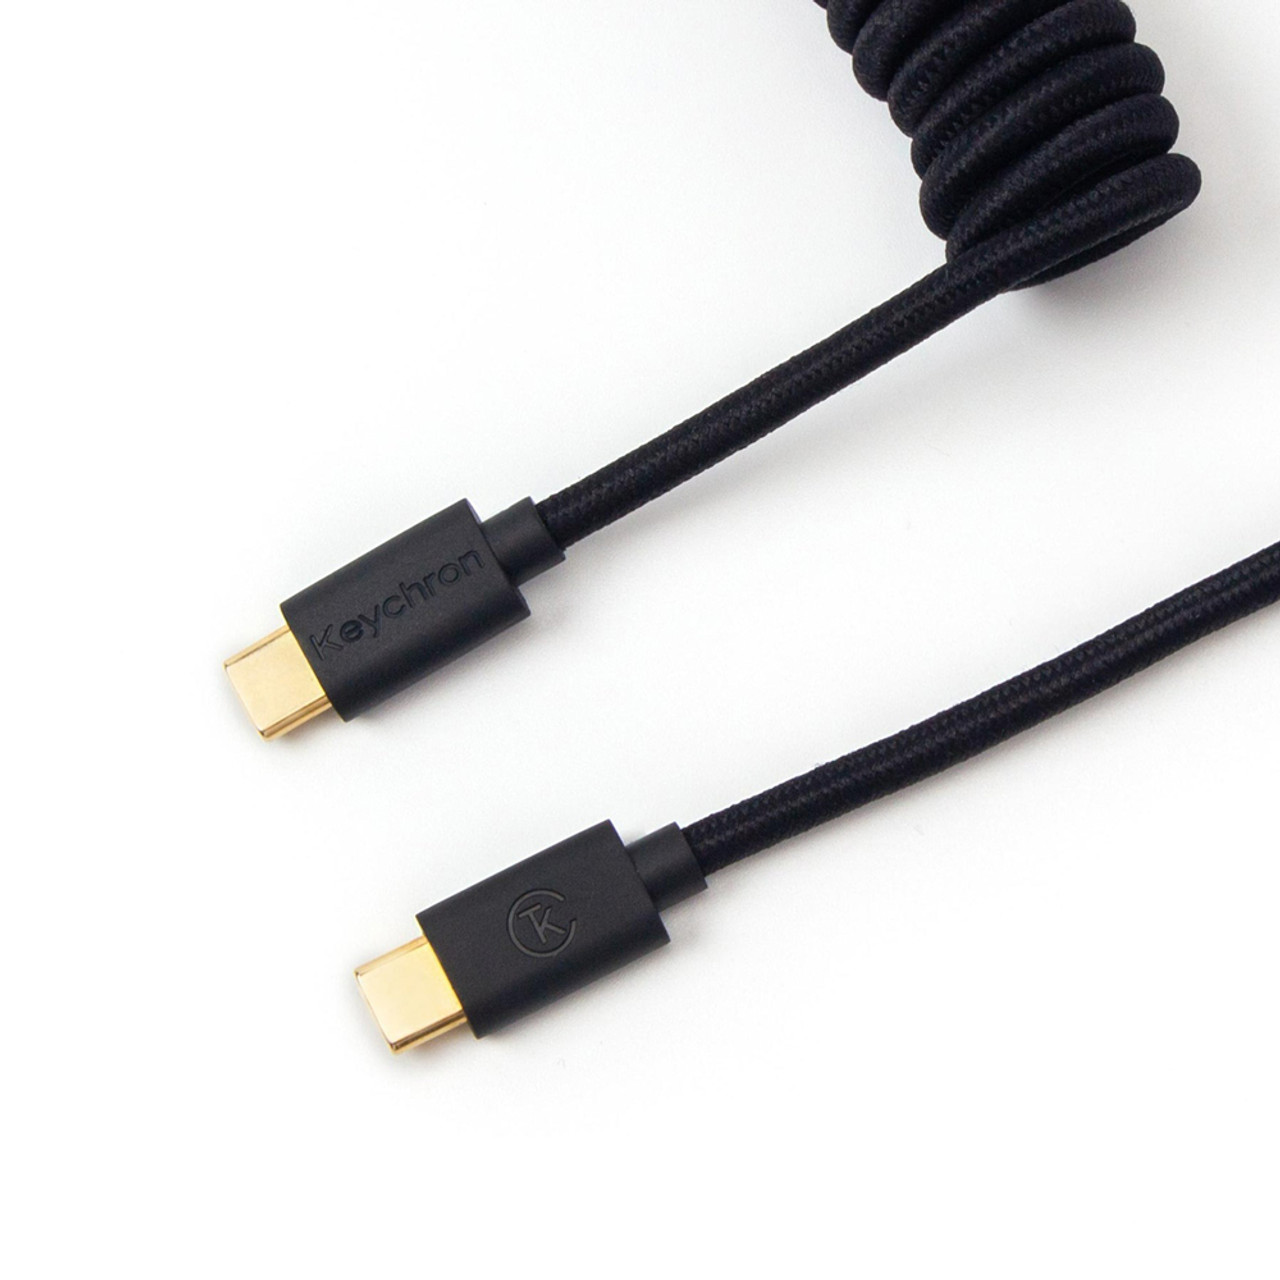 HyperX Coiled Cable - Durable Coiled Cable, Stylish Design, 5-Pin